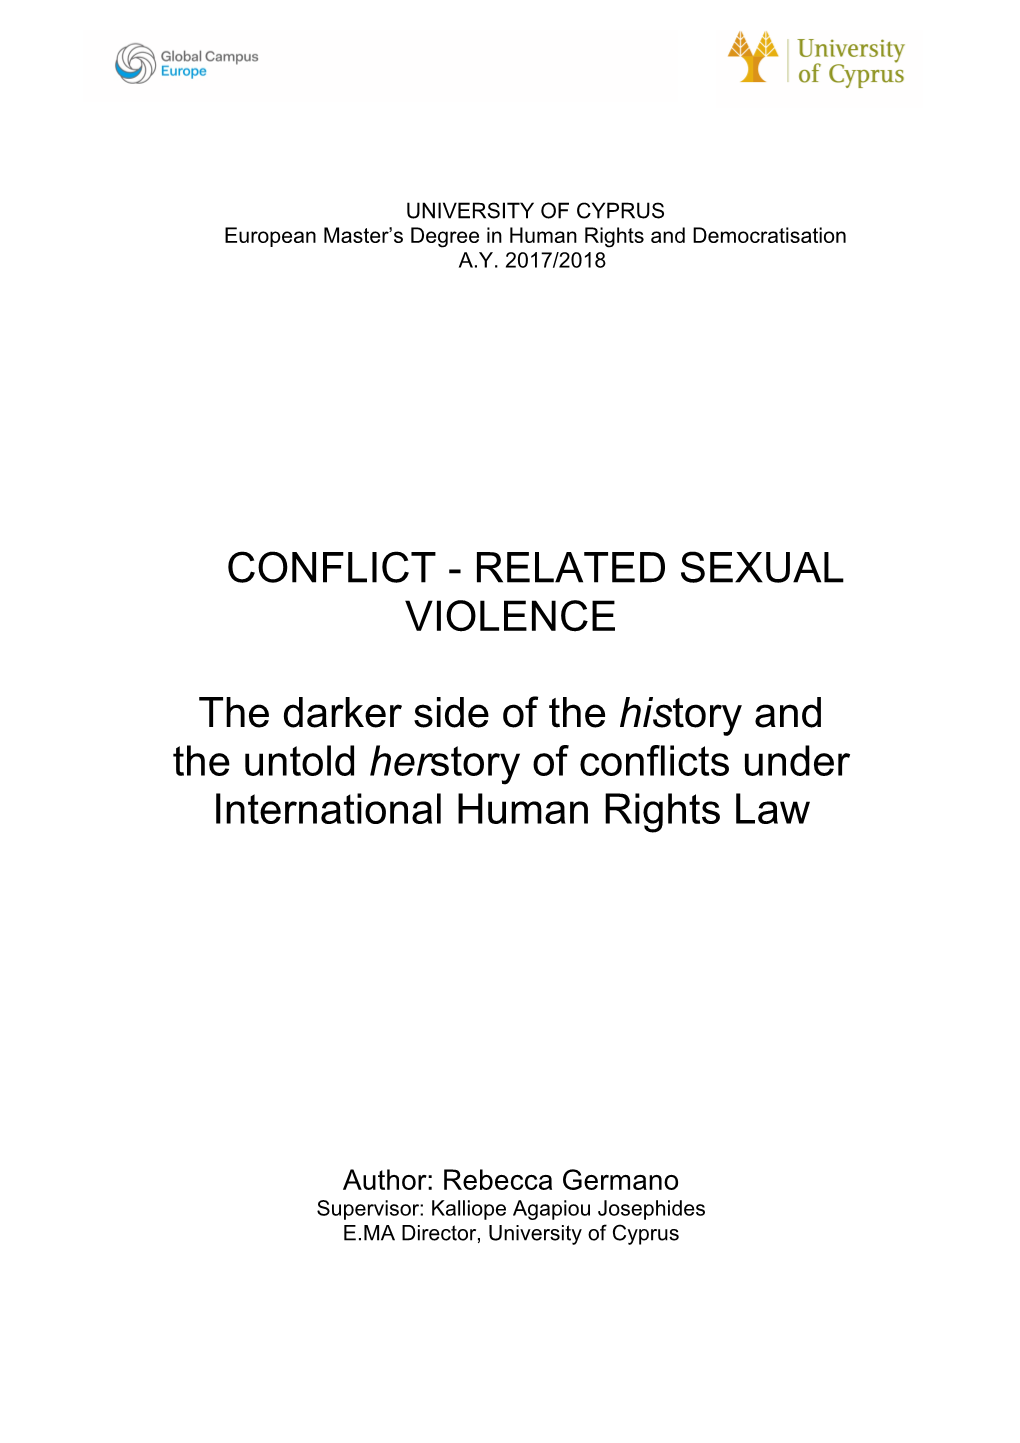 Conflict - Related Sexual Violence